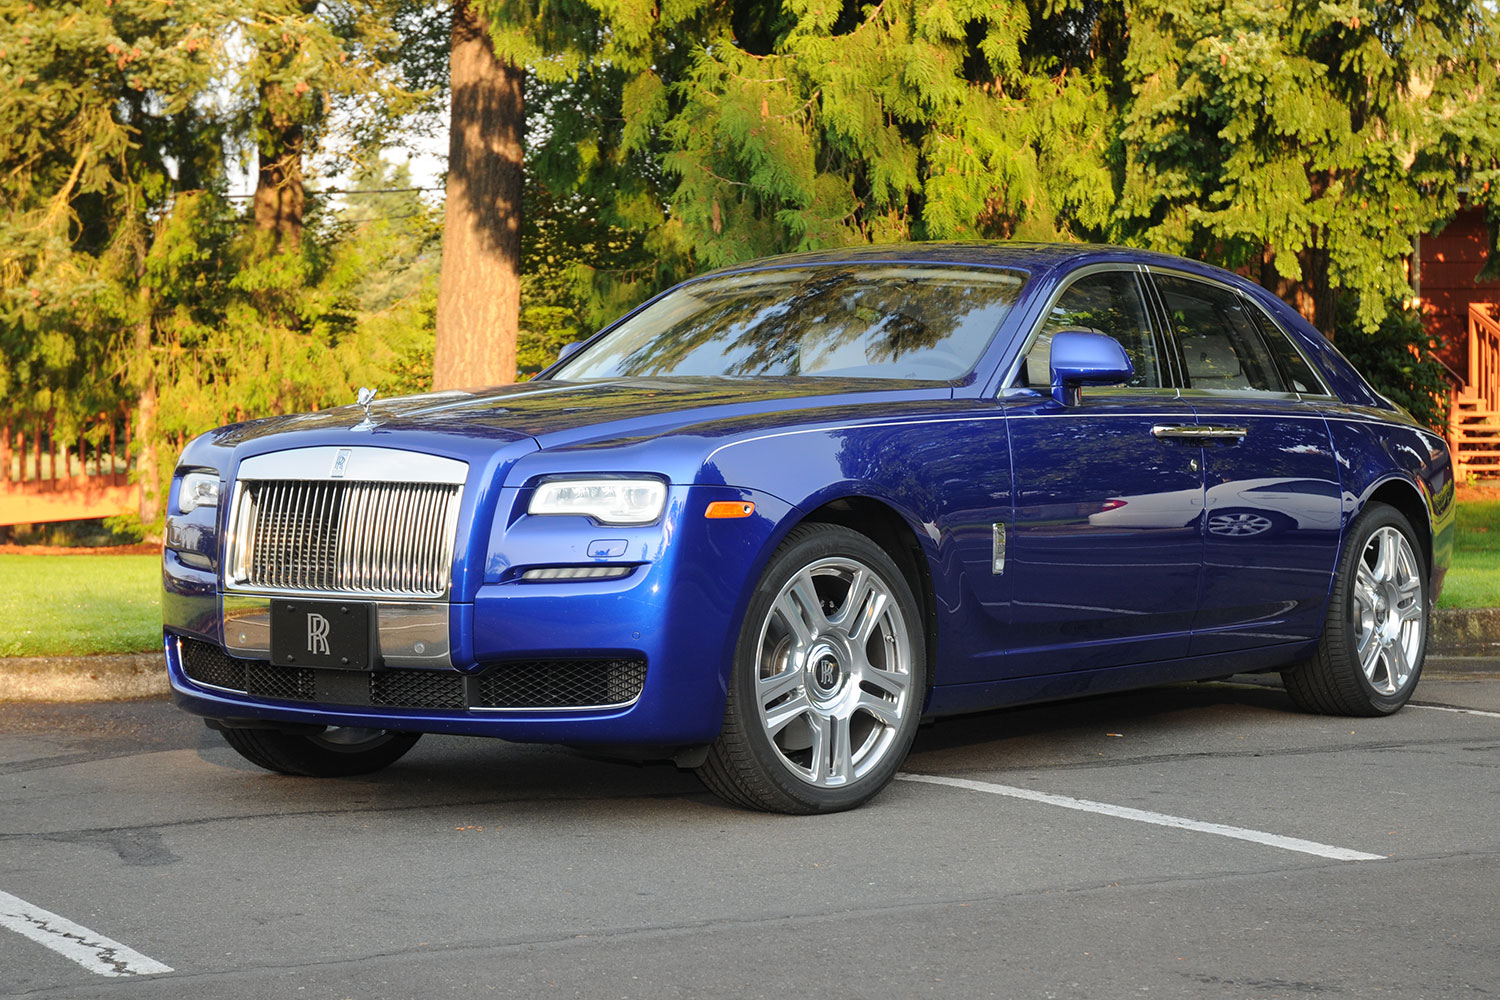 Rolls Royce Ghost: Everything You Need To Know About It